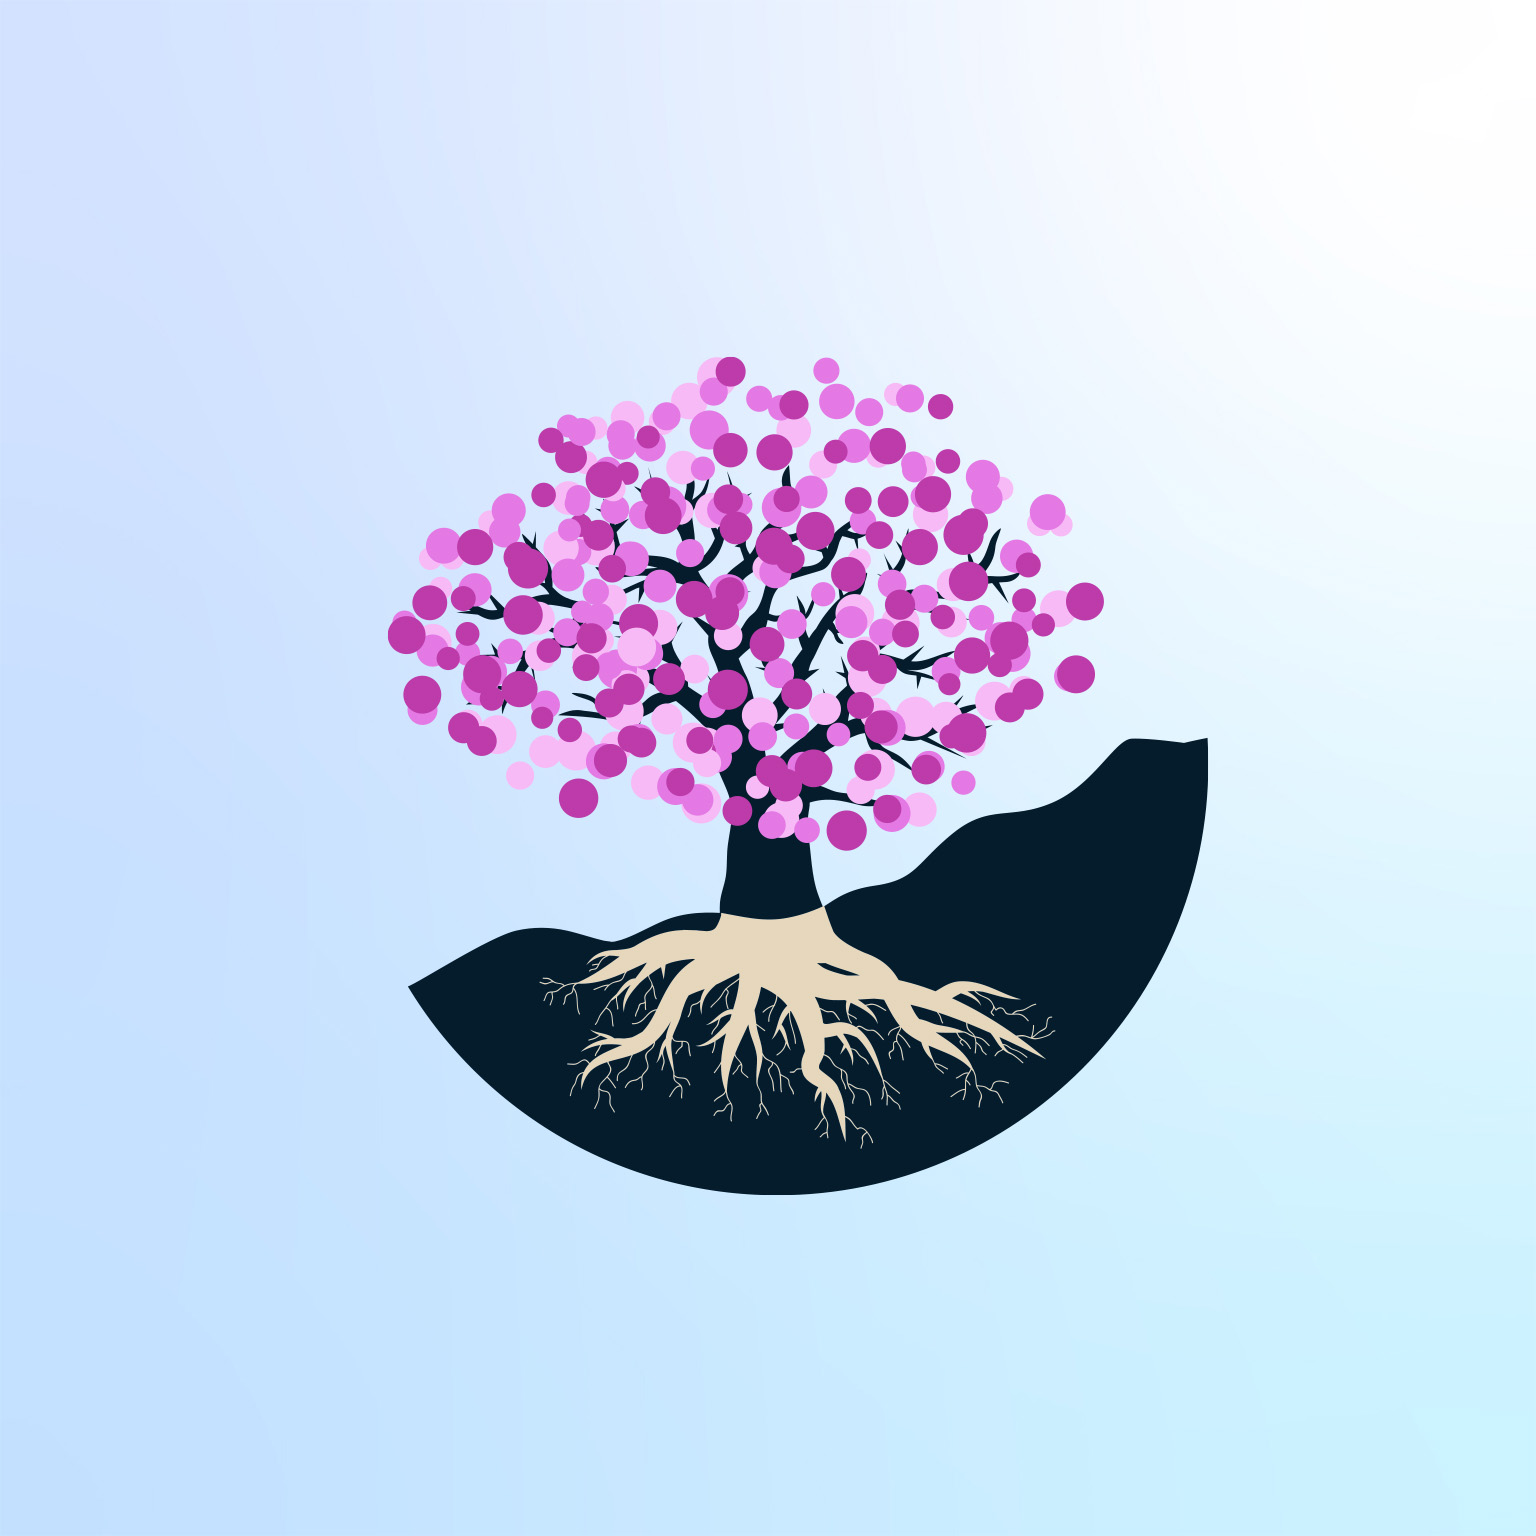 Vector illustration of a tree with blossoms and roots going into the ground.